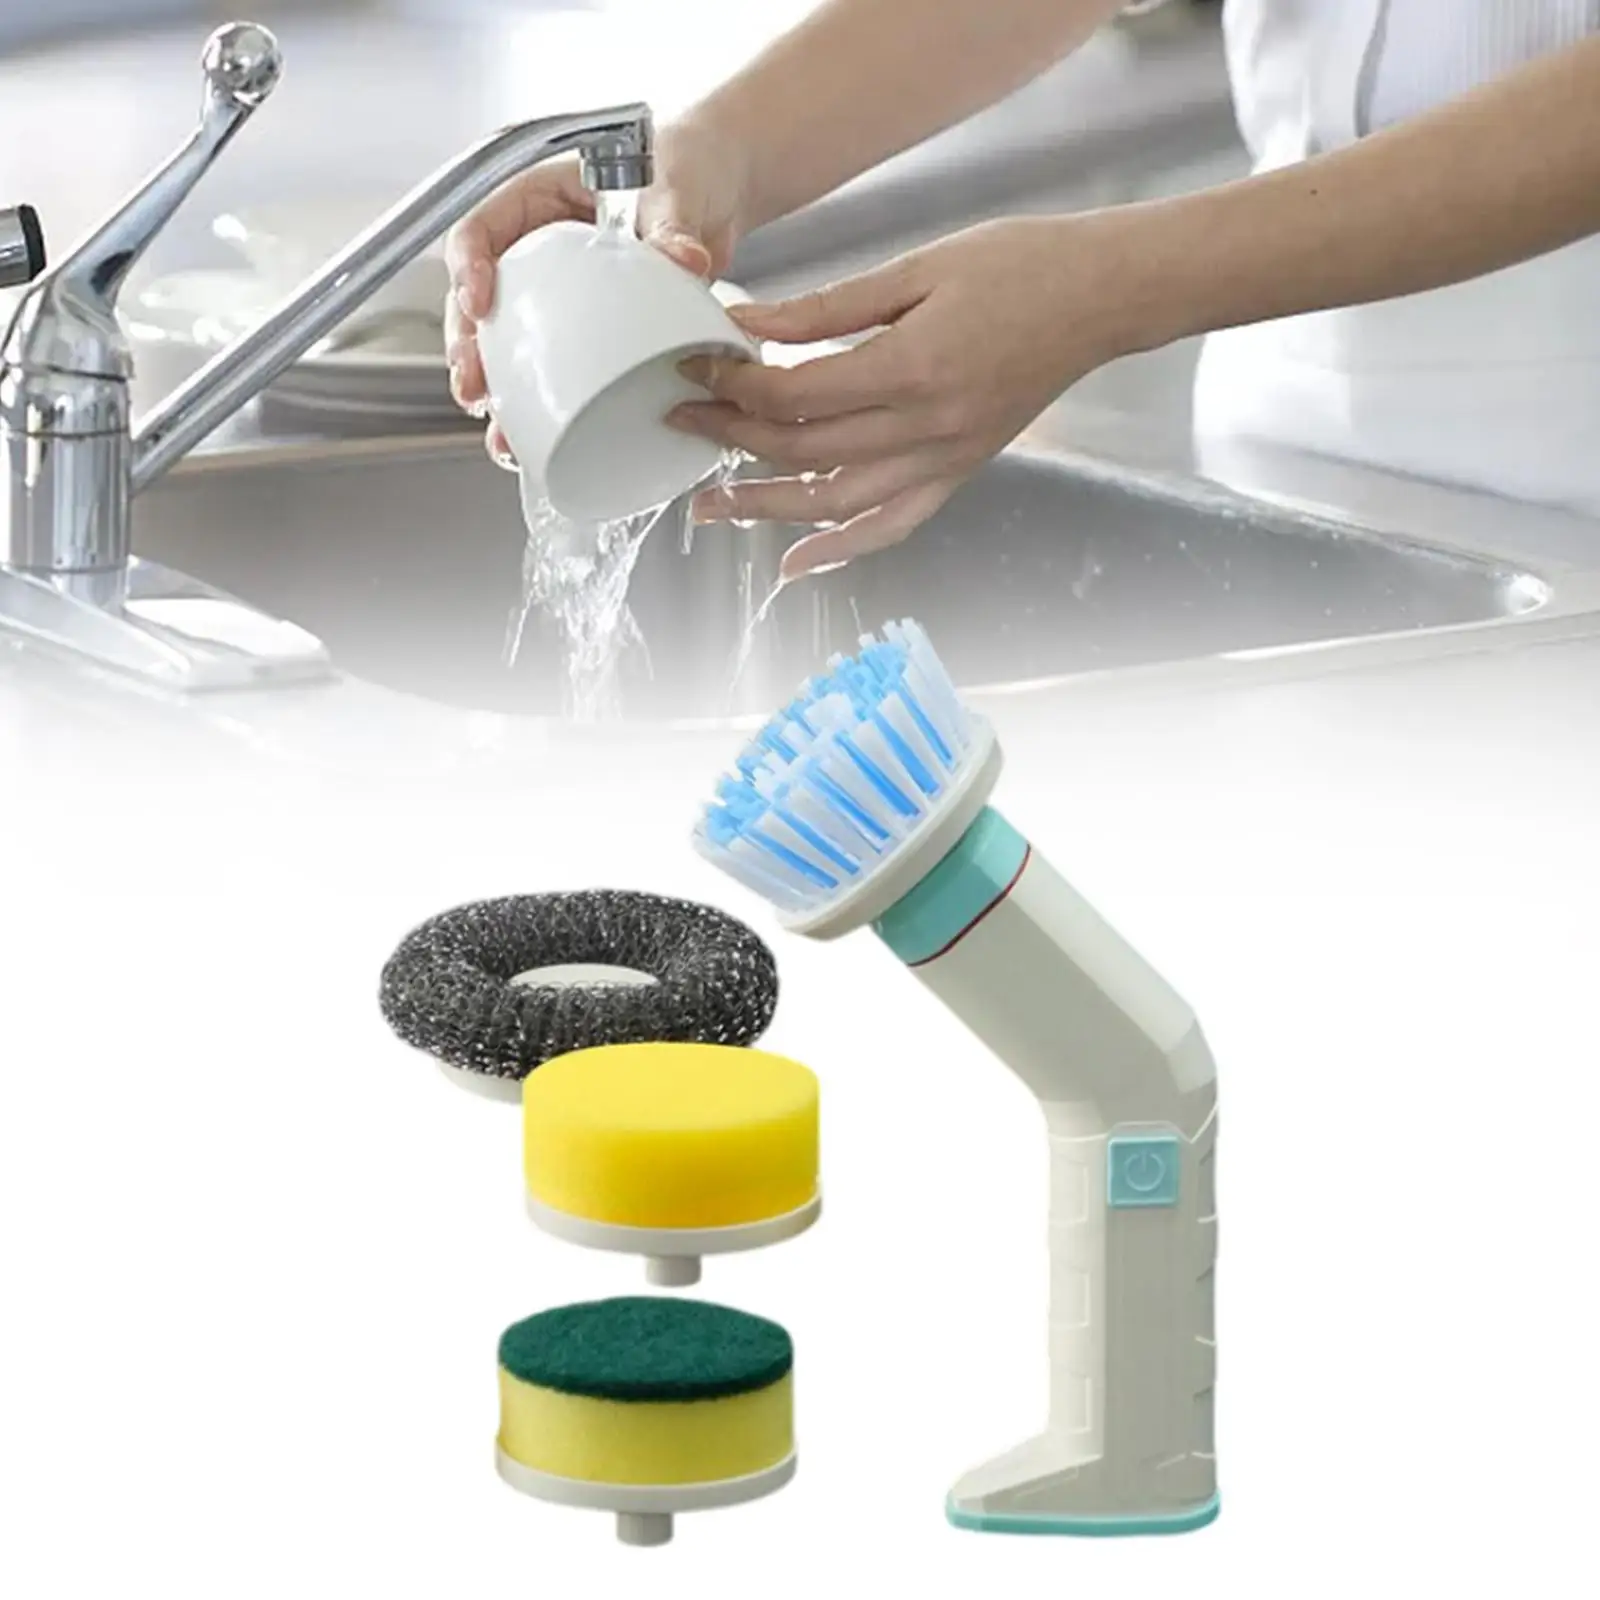 Electric Brush, Cordless Electric Scrubber, Handheld Electric Electric Scrubber,